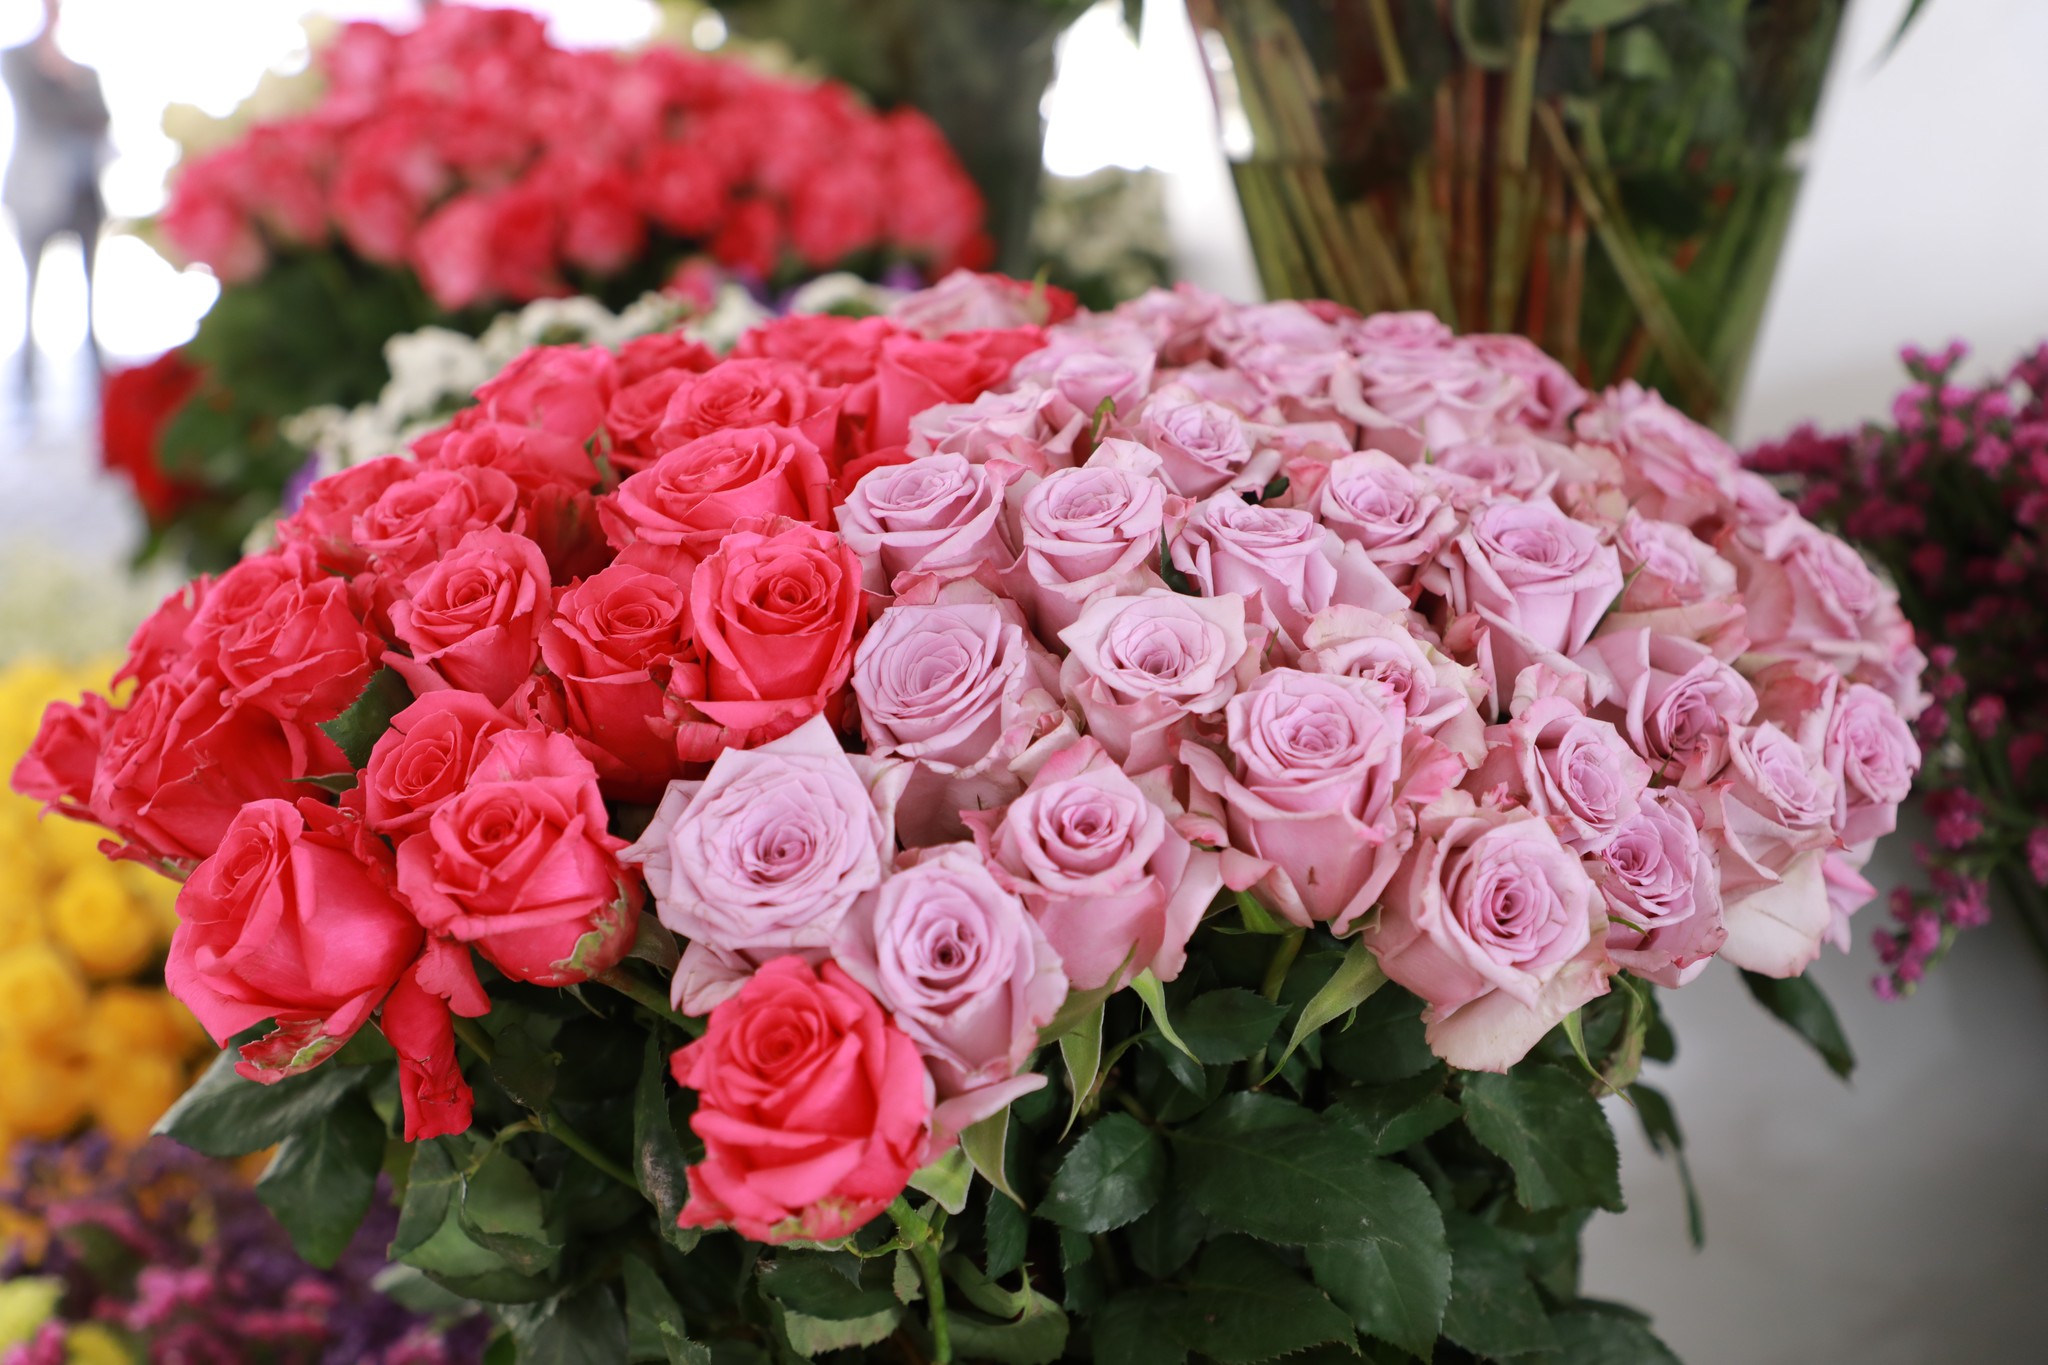 Ethiopian flower growers exported 2165.33 tons of flowers for the valentine day to the global market